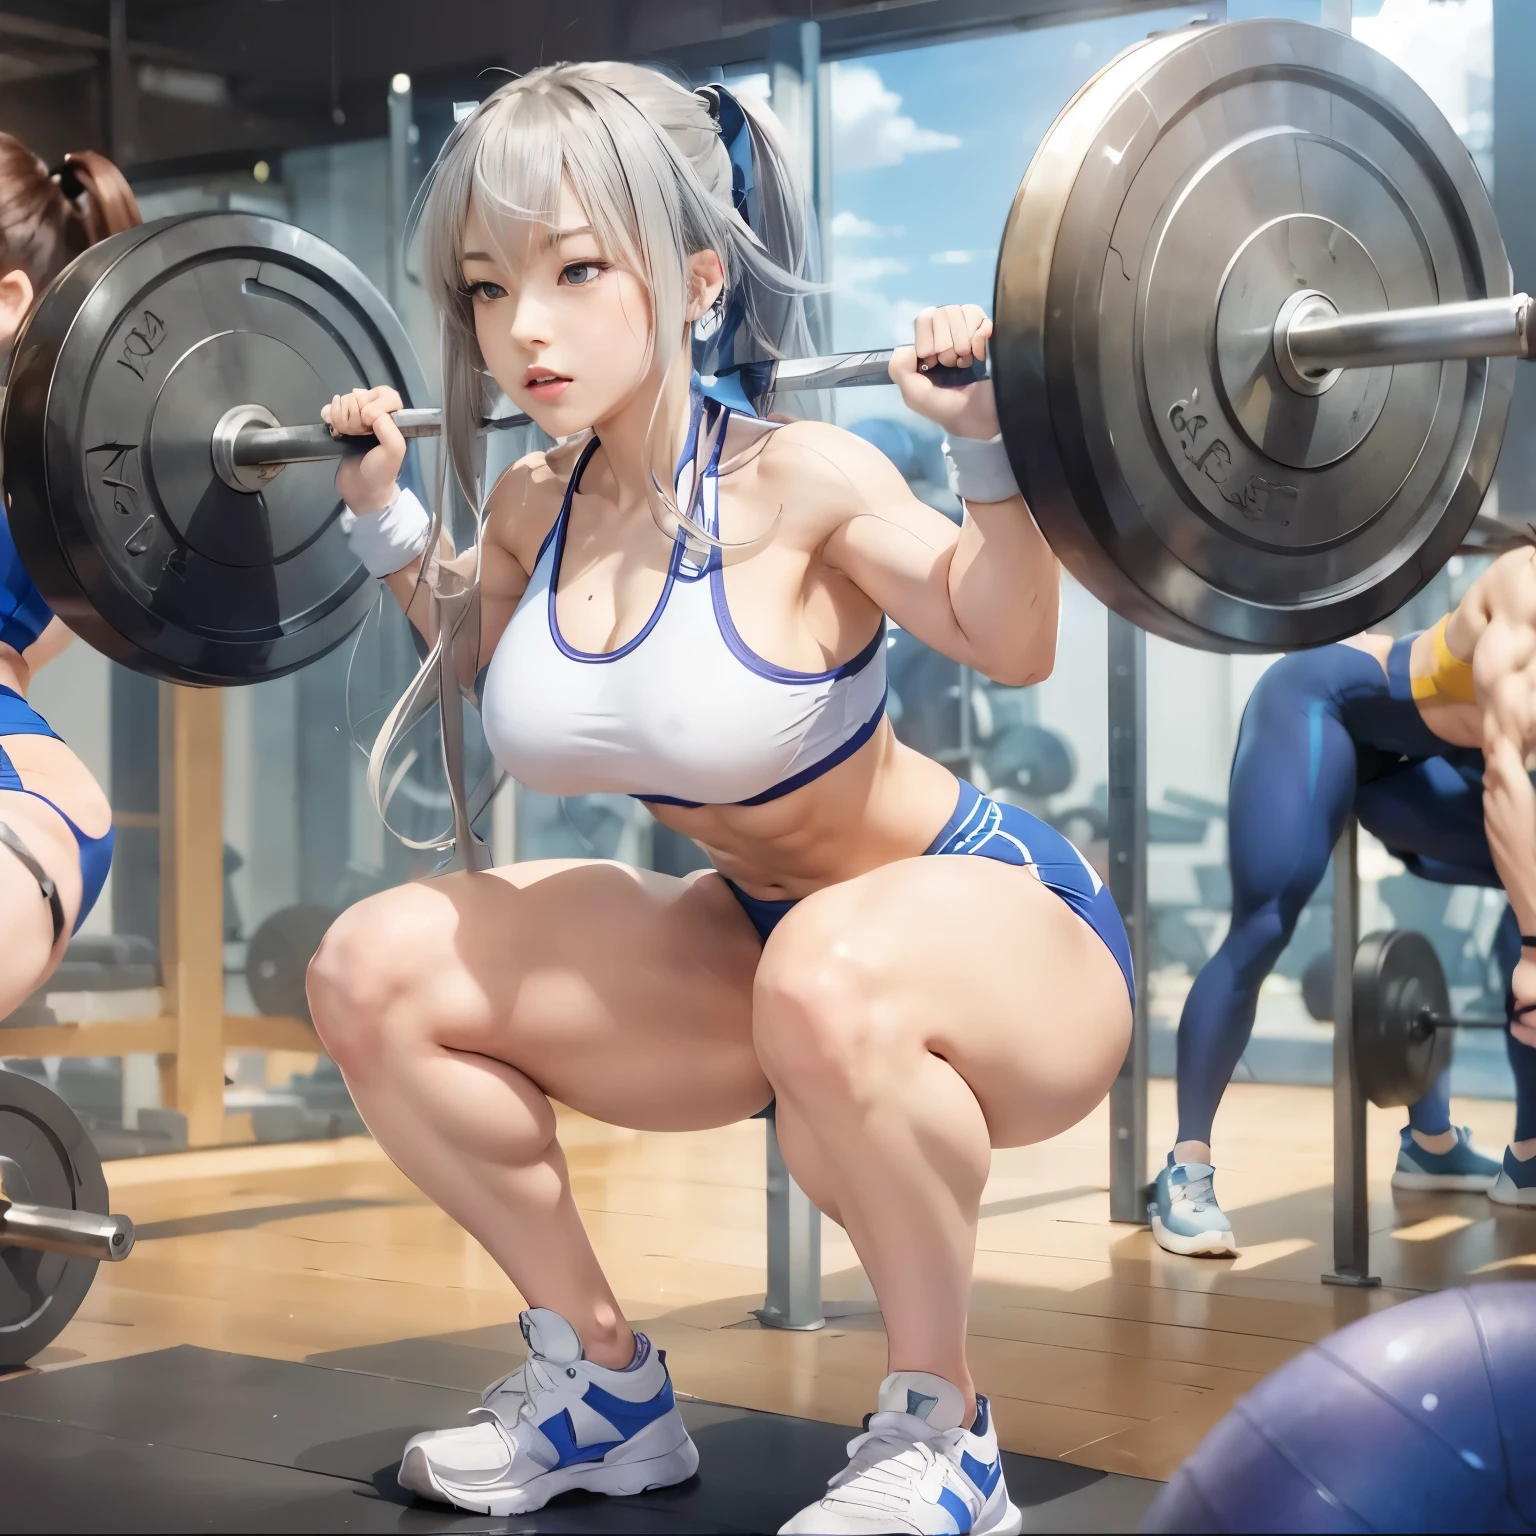 realistic girl girl squatting with a barbell in a gym, chun li at the gym, beautiful anime girl squatting, working out, muscular!!, lifting weights, muscular!, in a gym, most strongest pose, squatting, bursting with muscles, pixiv 3dcg, muscular thighs, thicc, badass anime 8 k, muscular girl, smooth anime cg art